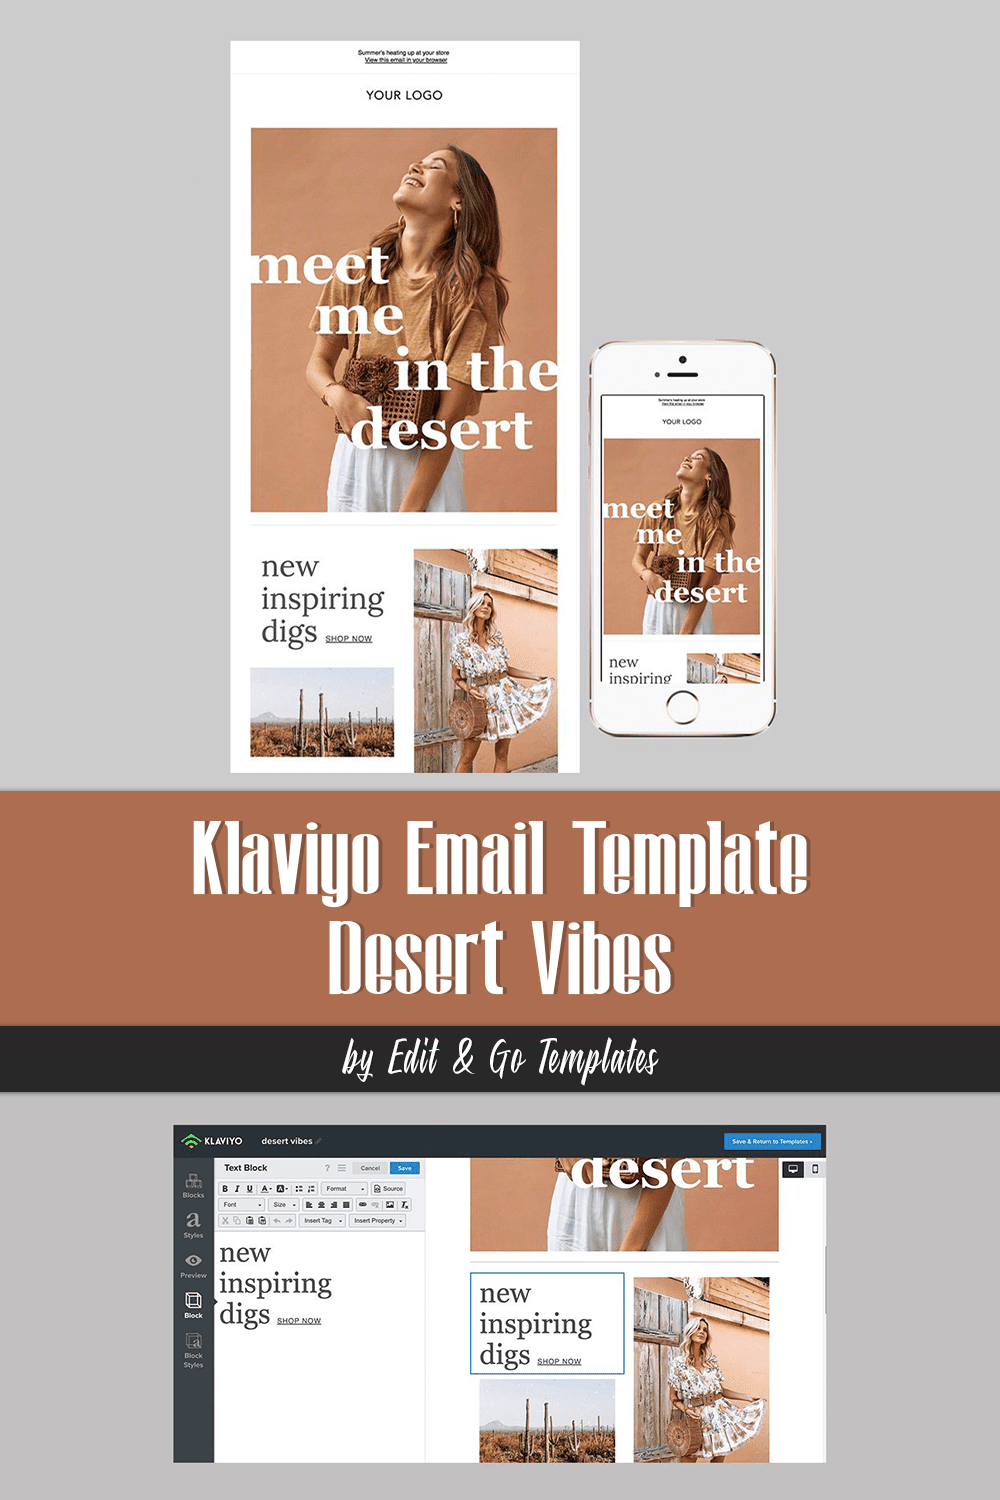 Cover with images of adorable email design template.